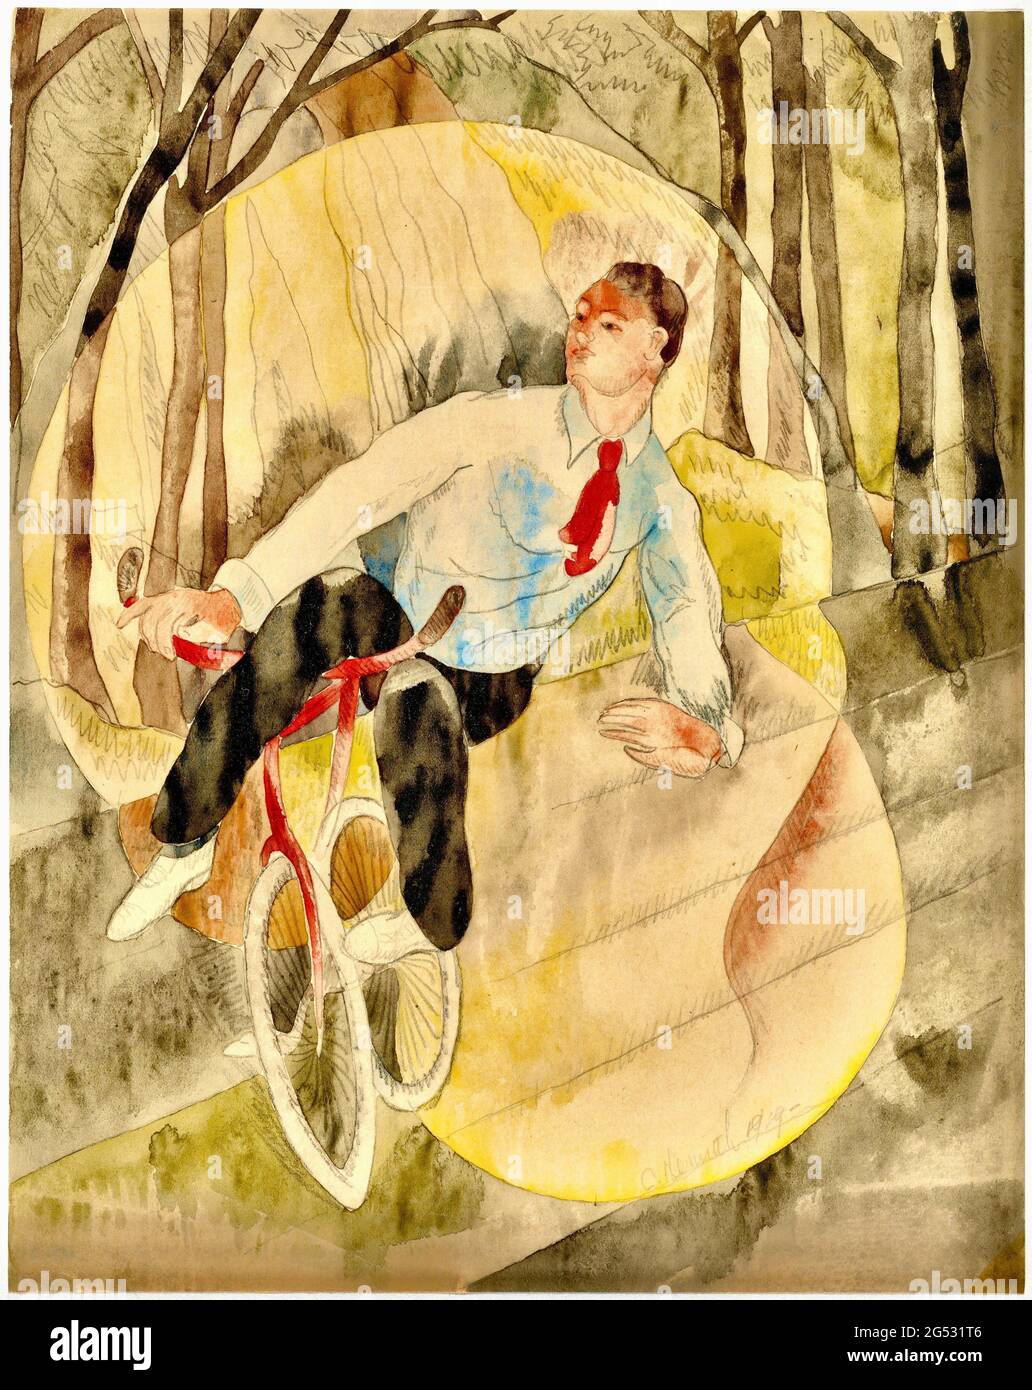 Charles Demuth opera dal titolo The Bicycle Rider dal 1919 Foto Stock